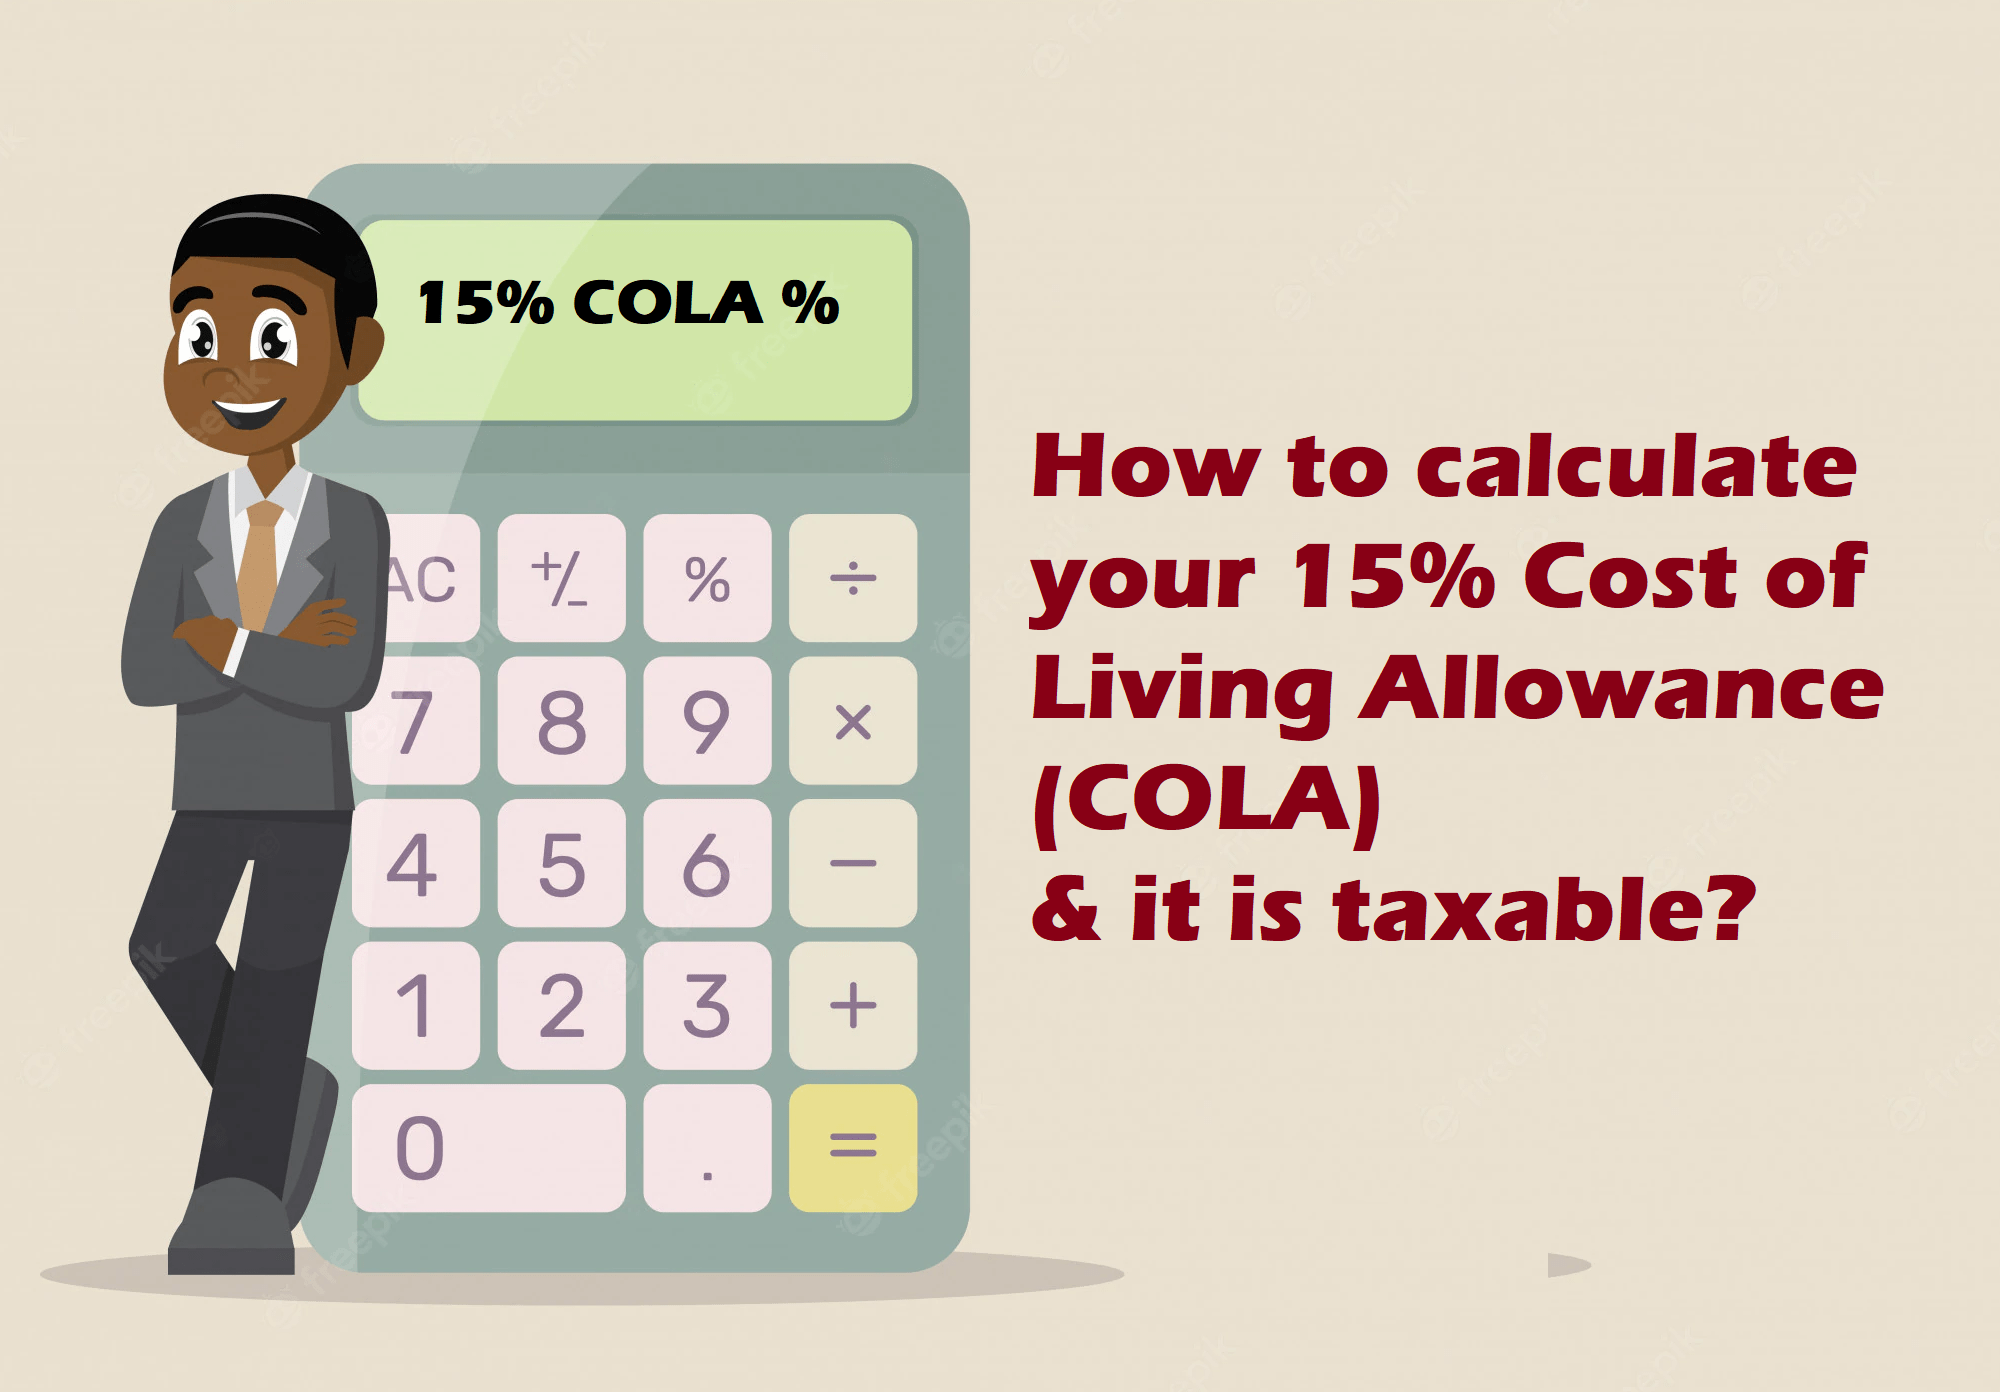 HOW TO CALCULATE 15 COST OF LIVING ALLOWANCE (COLA)